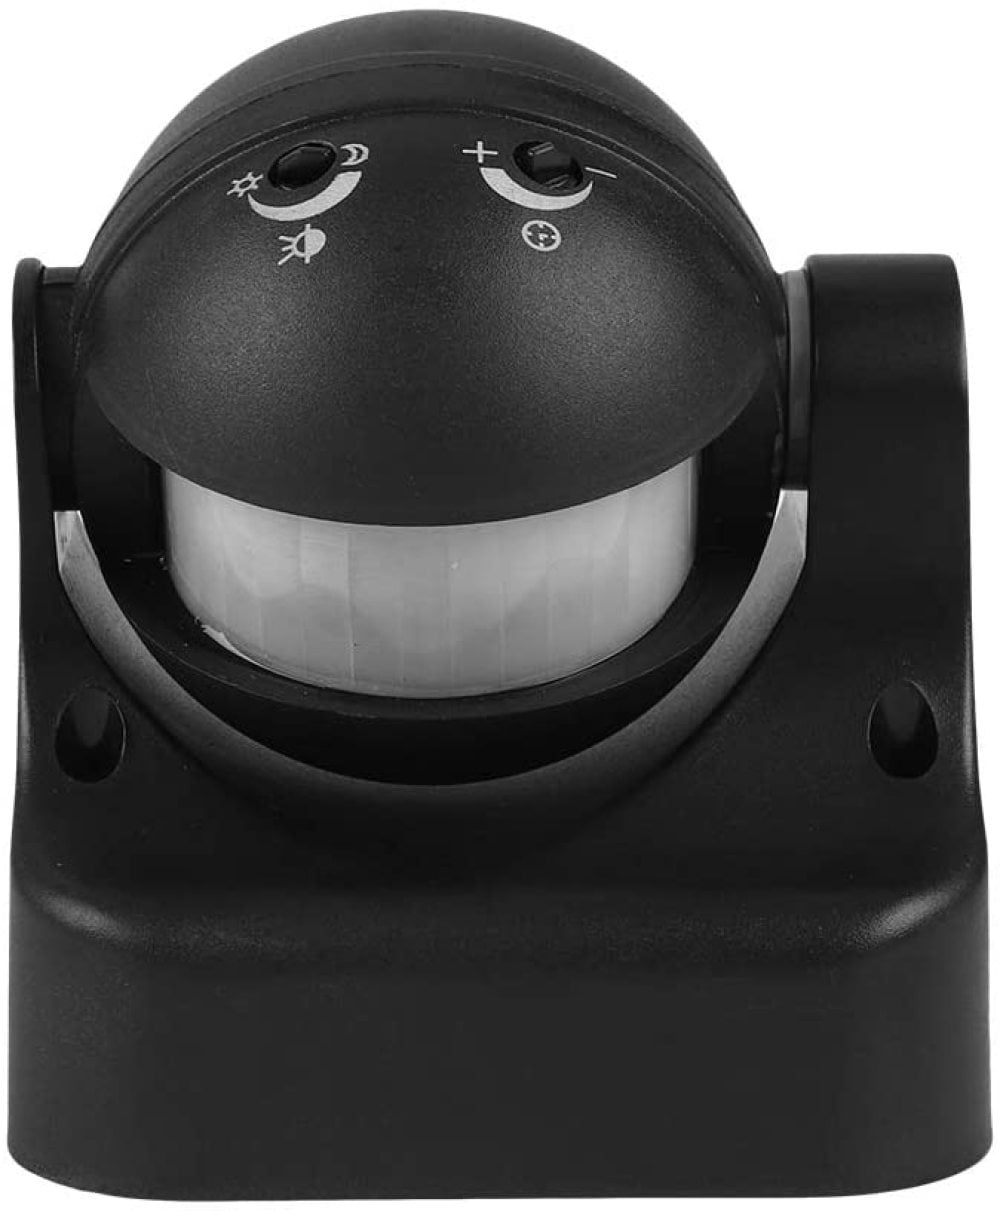 TS-A110 Infrared Sensor Switch IP44 Outdoor PIR Security Motion Sensor with 180 Degree Induction Angle,Super Long Induction Distance 15 m Black